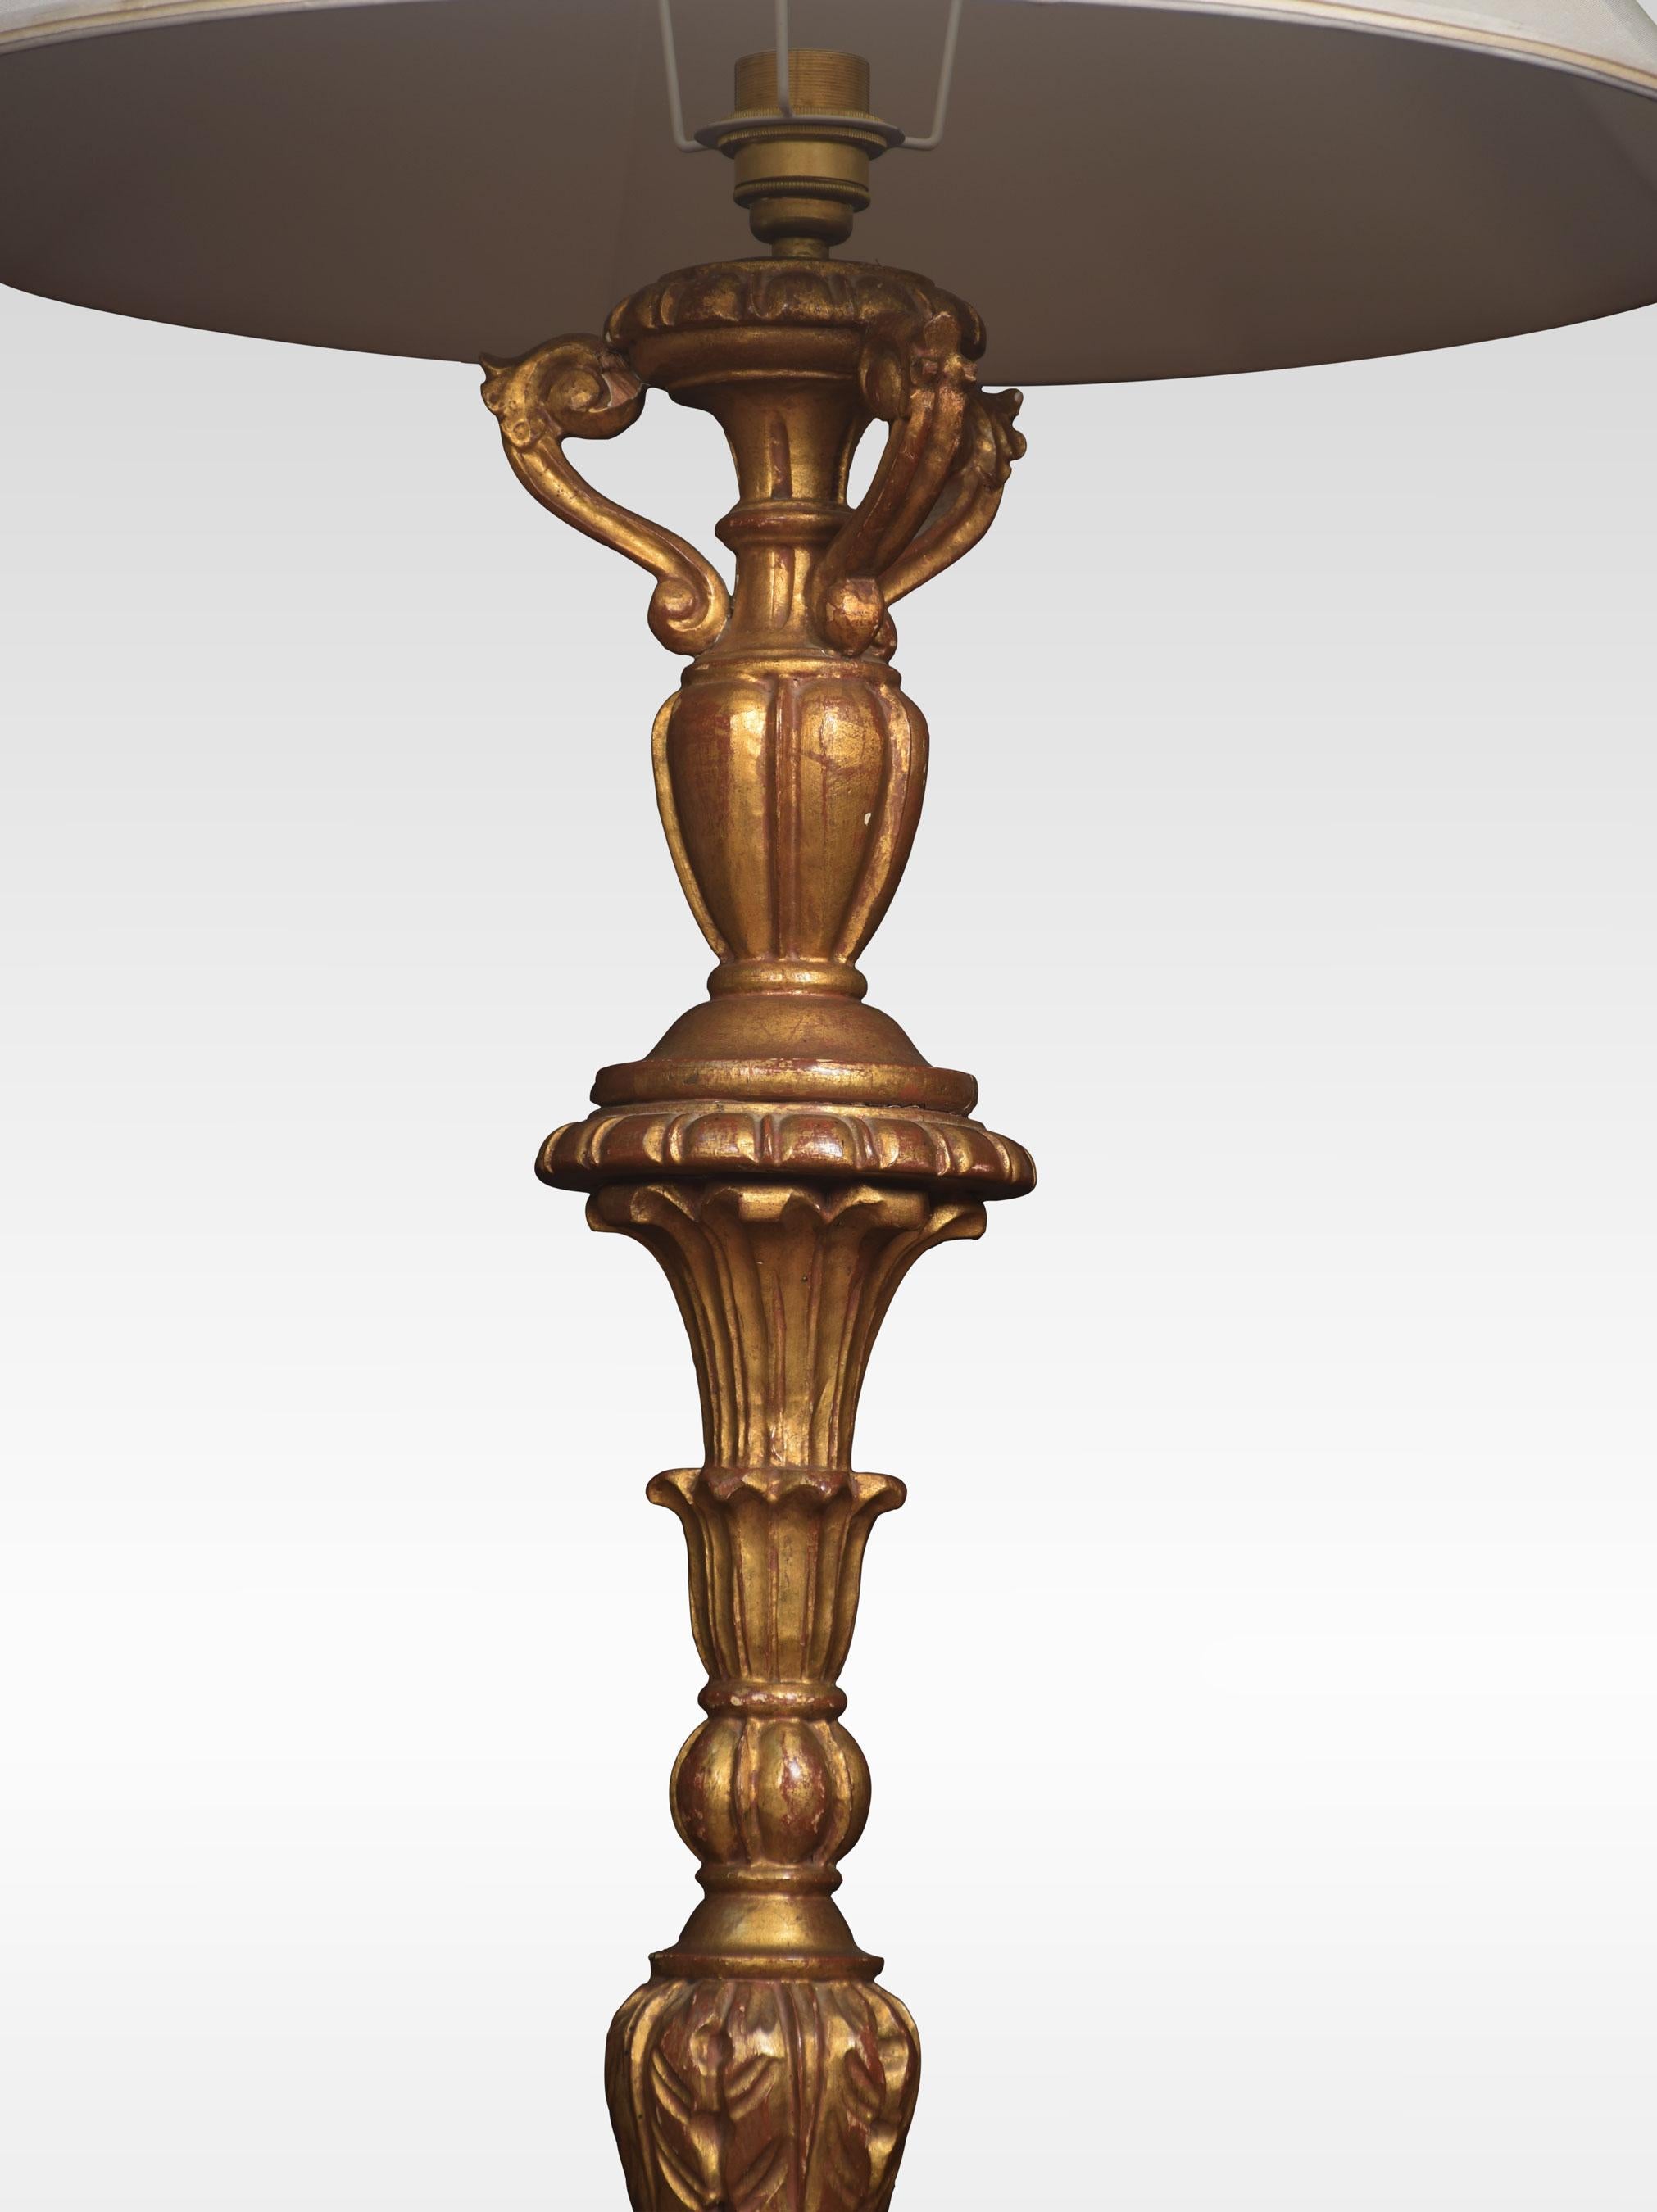 Carved giltwood standard lamp, with a spiral twist stem, raised up on circular base terminating in bun feet.
Dimensions
Height 62 inches
Width 13.5 inches
Depth 13.5 inches.